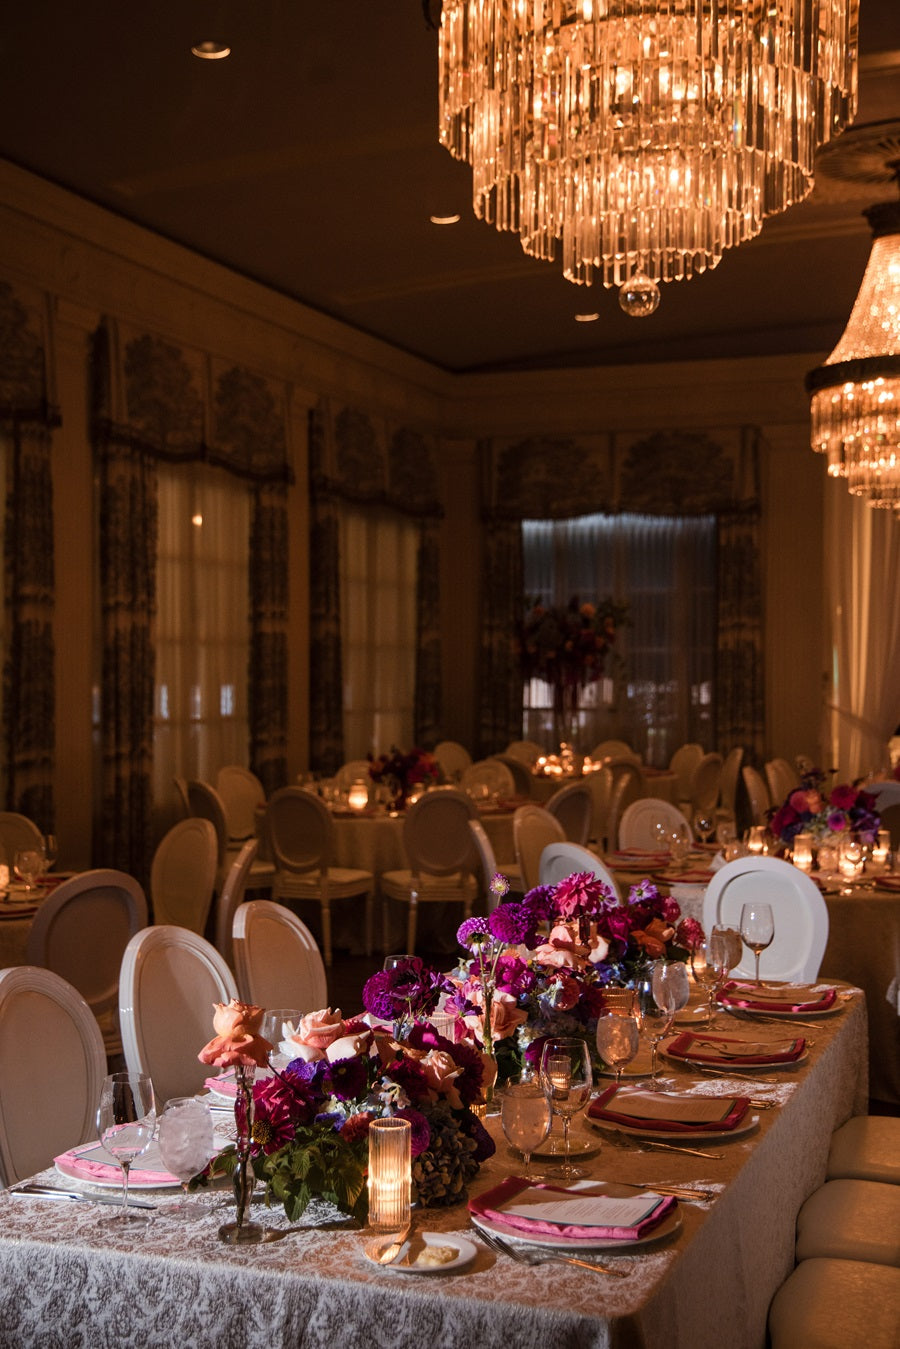 A wide room shot showing the jeweltoned centerpieces, candles, and tableware.